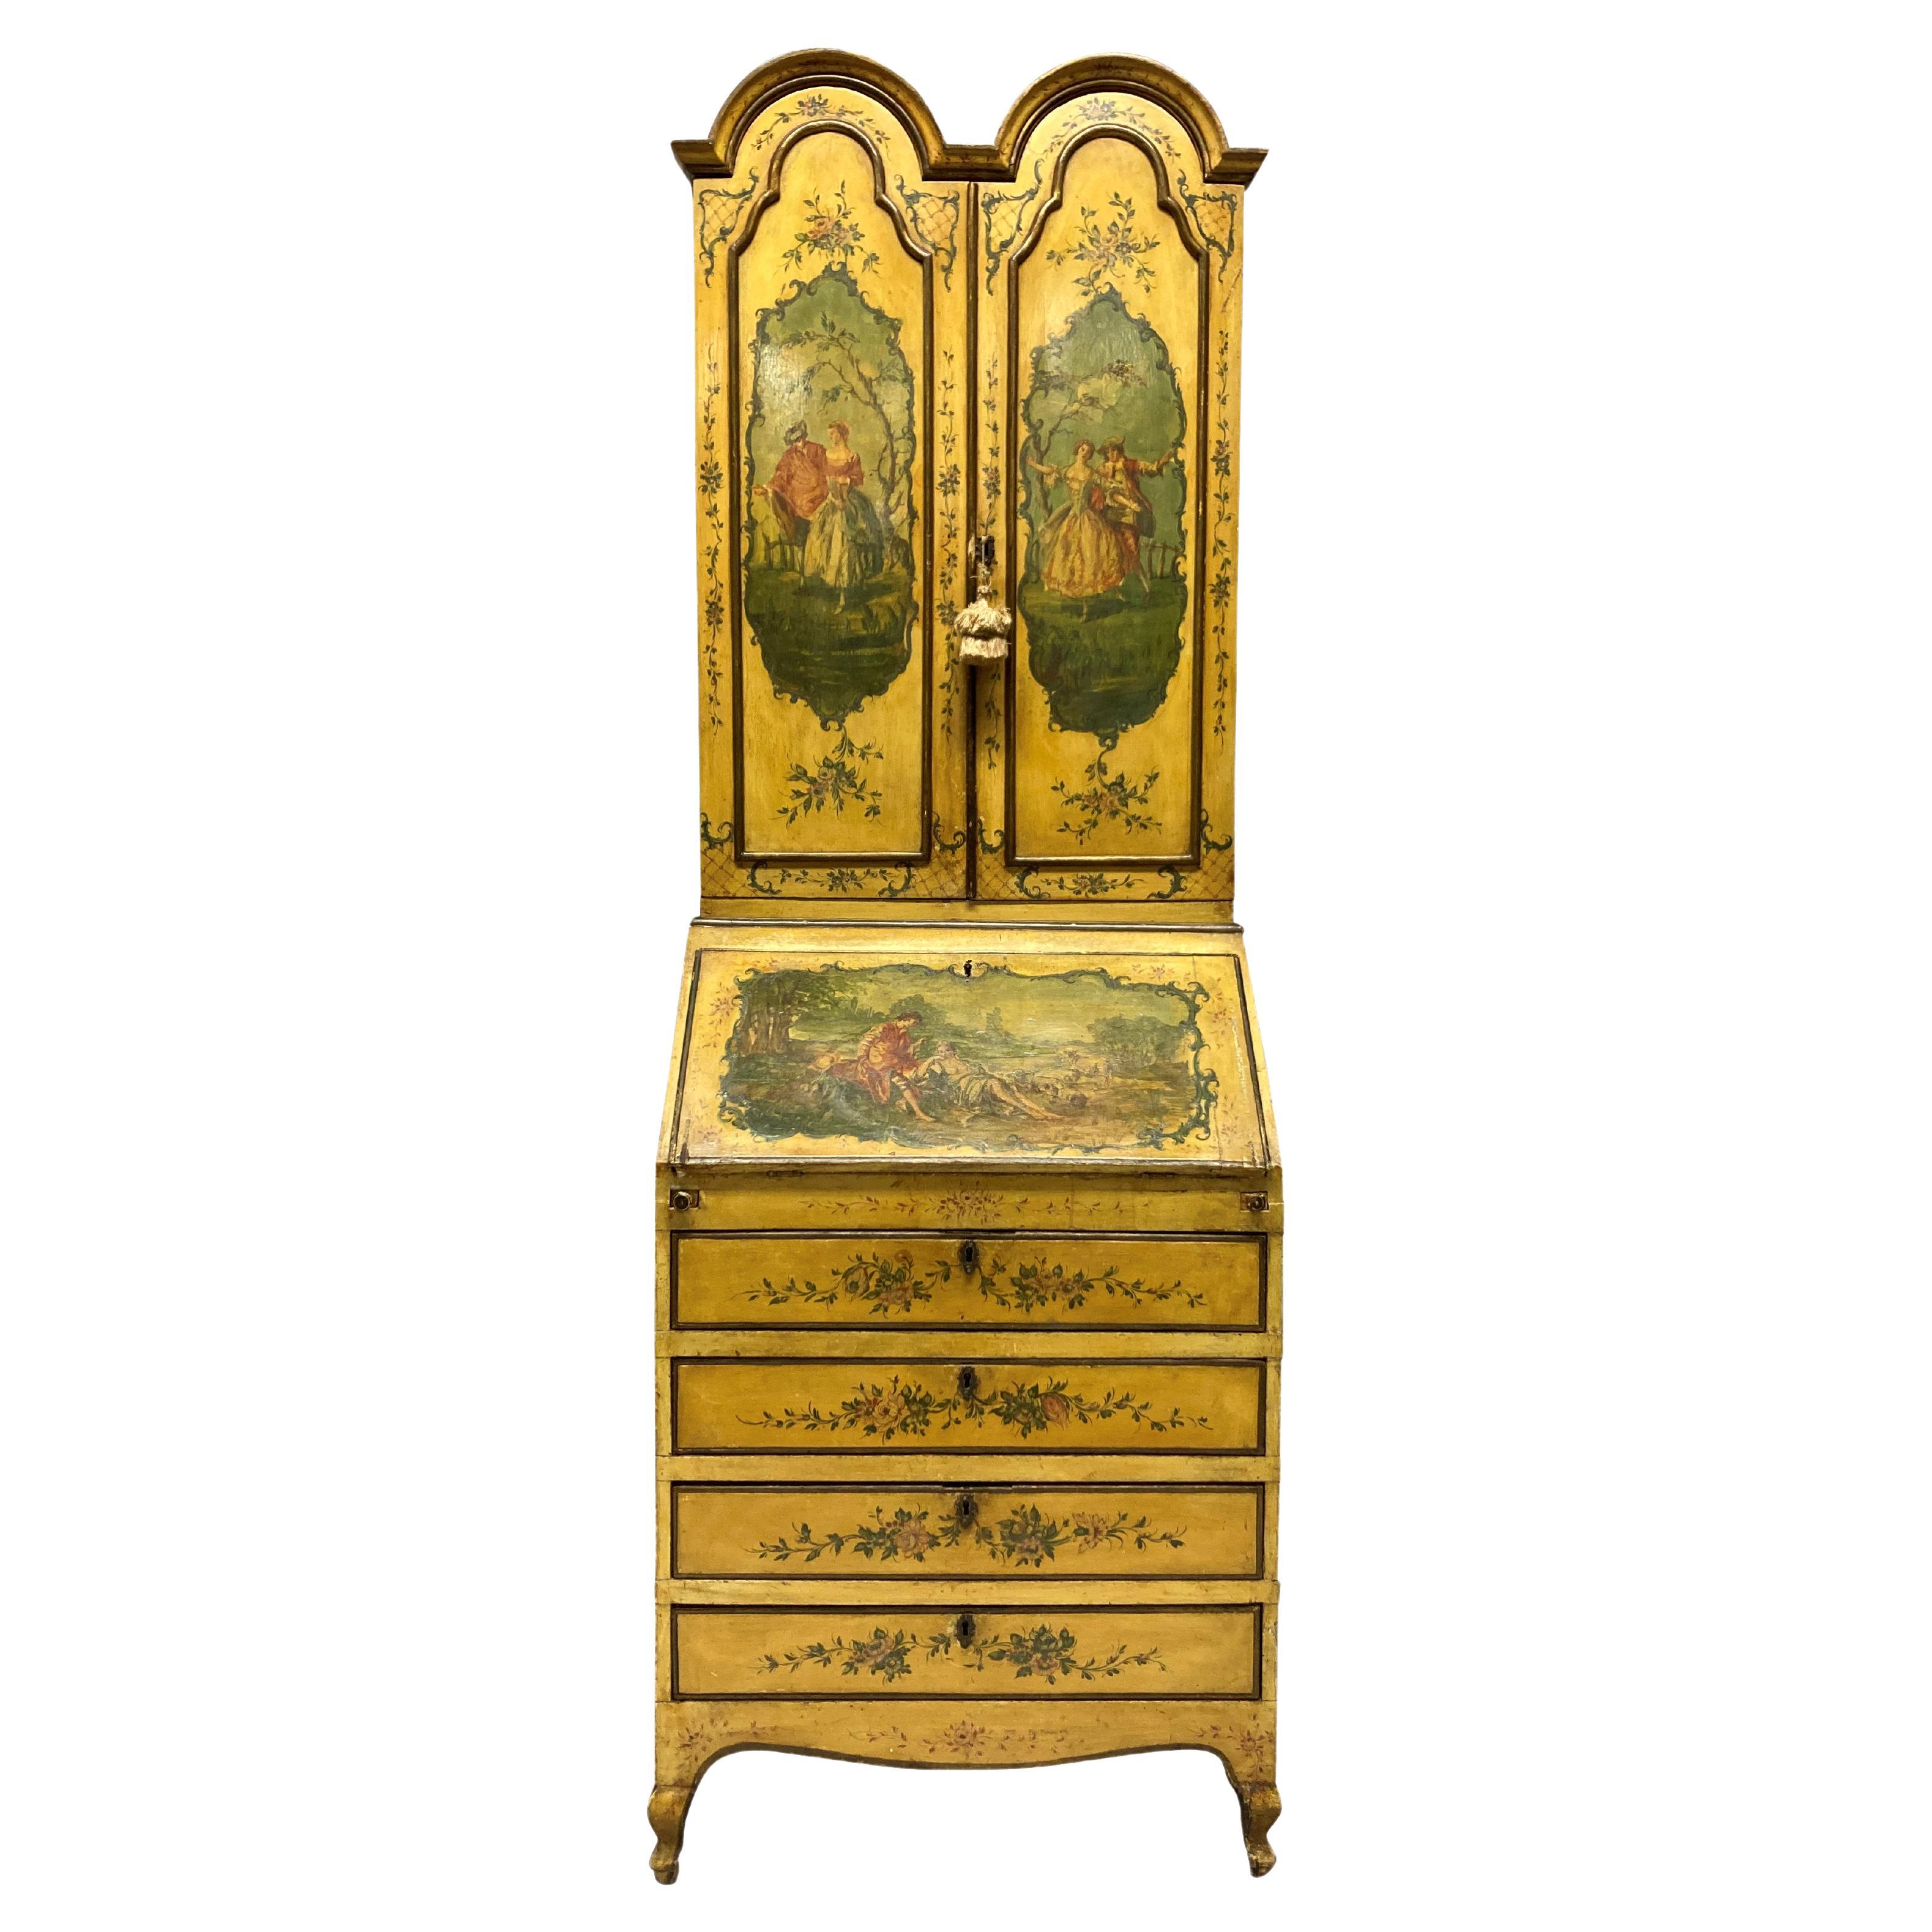 Venetian Secretaire Cabinet in Hand Painted Yellow Lacquer